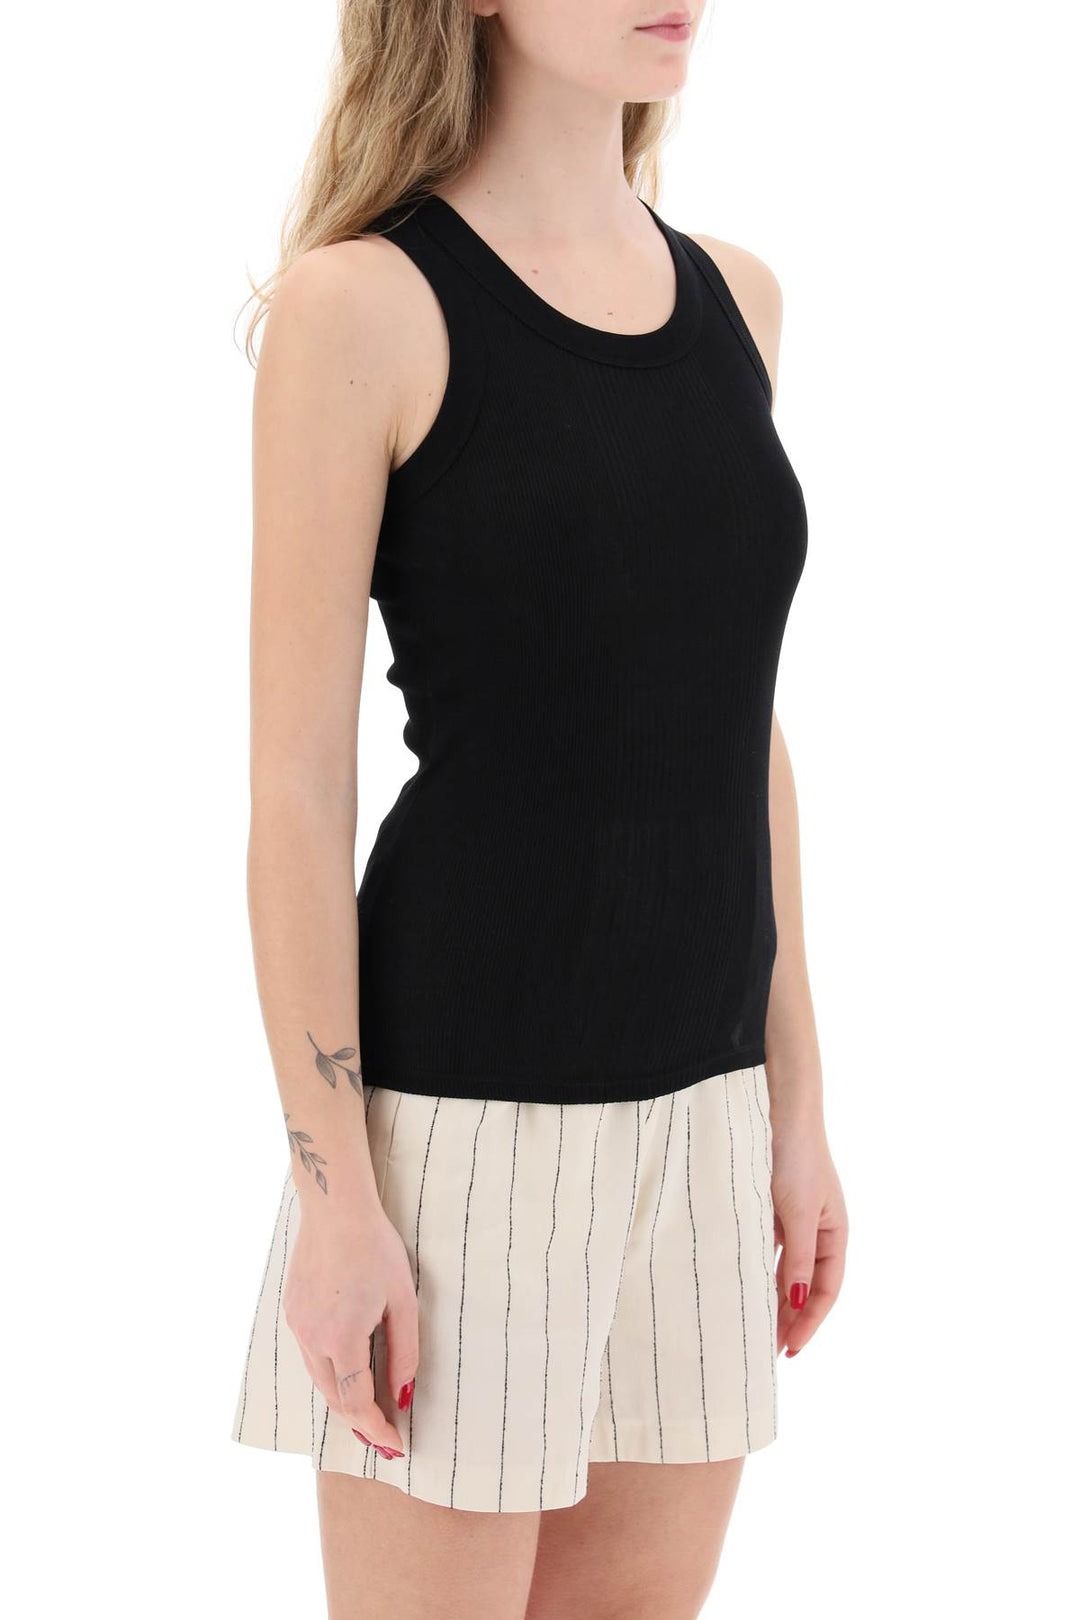 Loulou Studio Replace With Double Quoteorganic Mercerized Cotton Top   Black